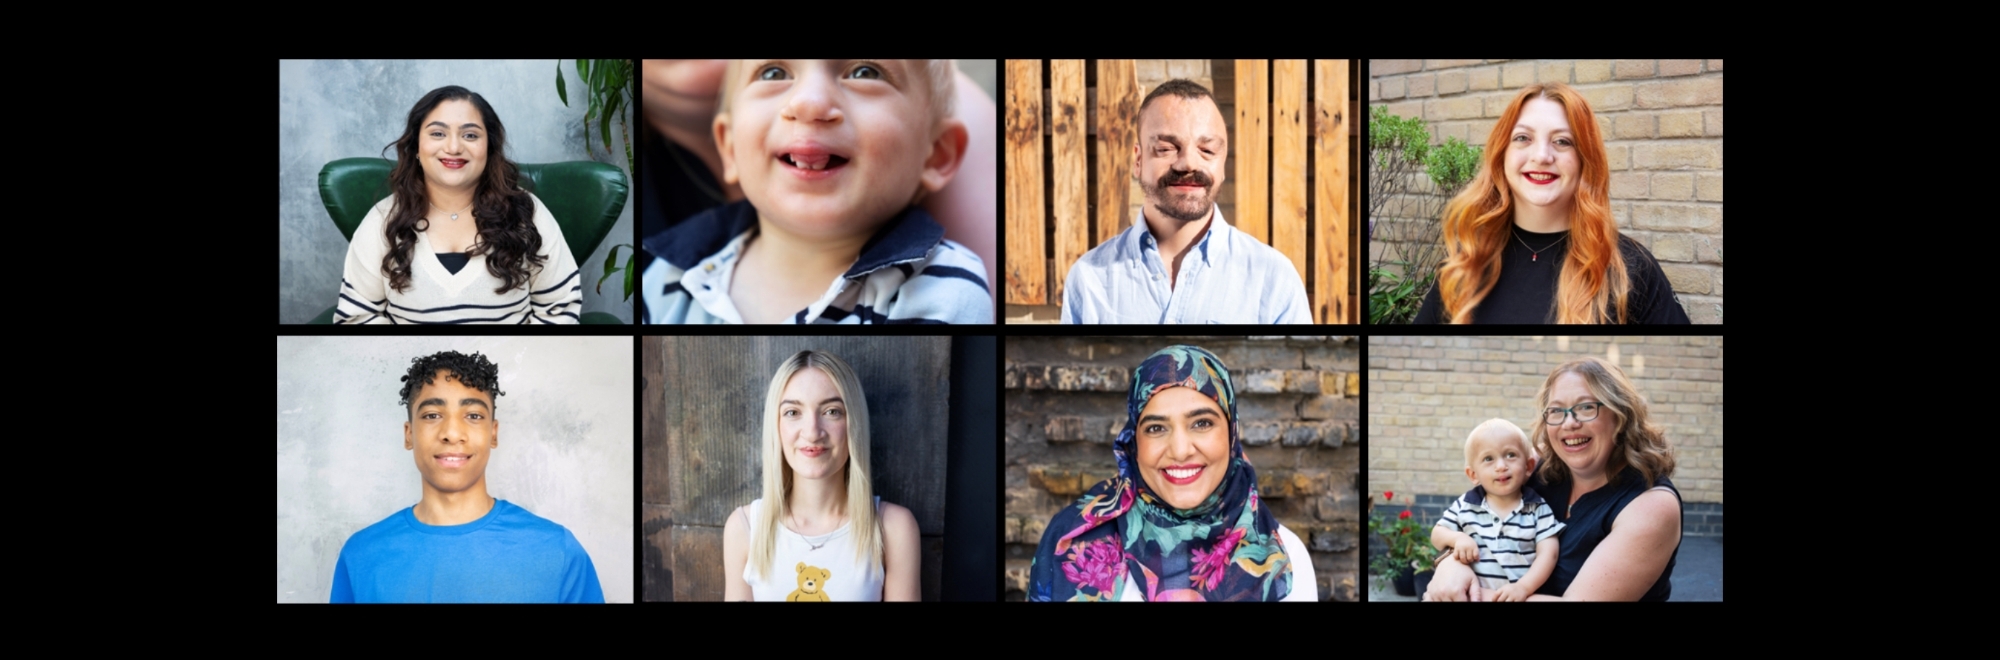 Celebrating 'Beauty In Every Smile' as people affected by facial differences share their experiences